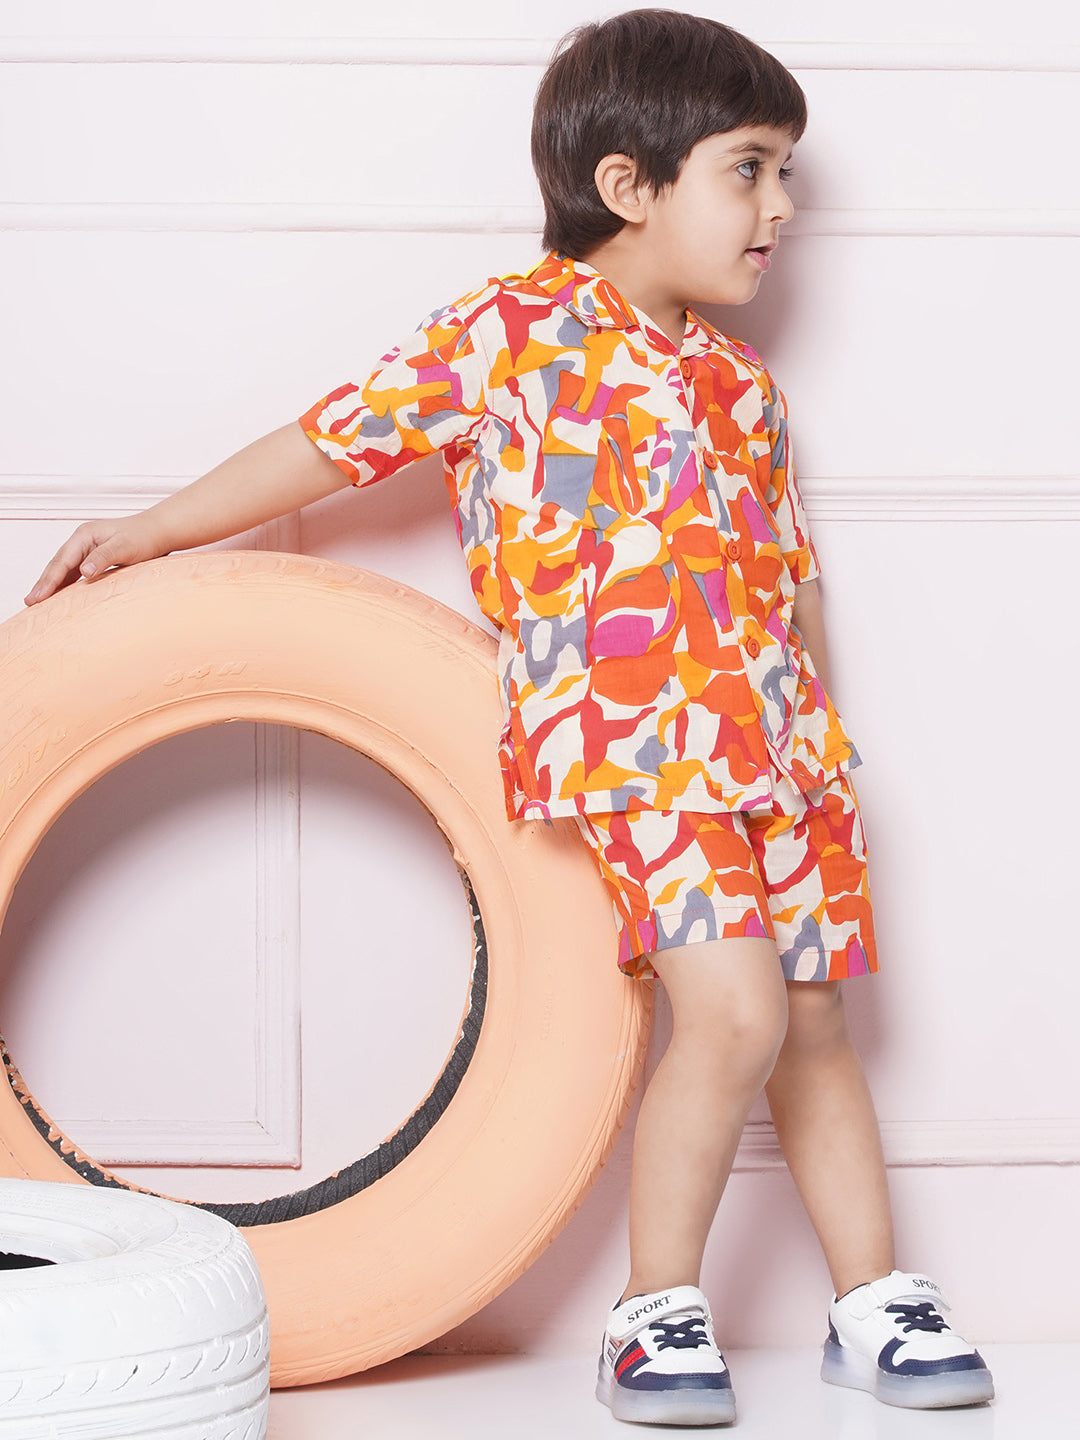 Orange Cotton Shirt & shorts Half Sleeves with Collar and Abstract Print CO-ORDS Set for Boys